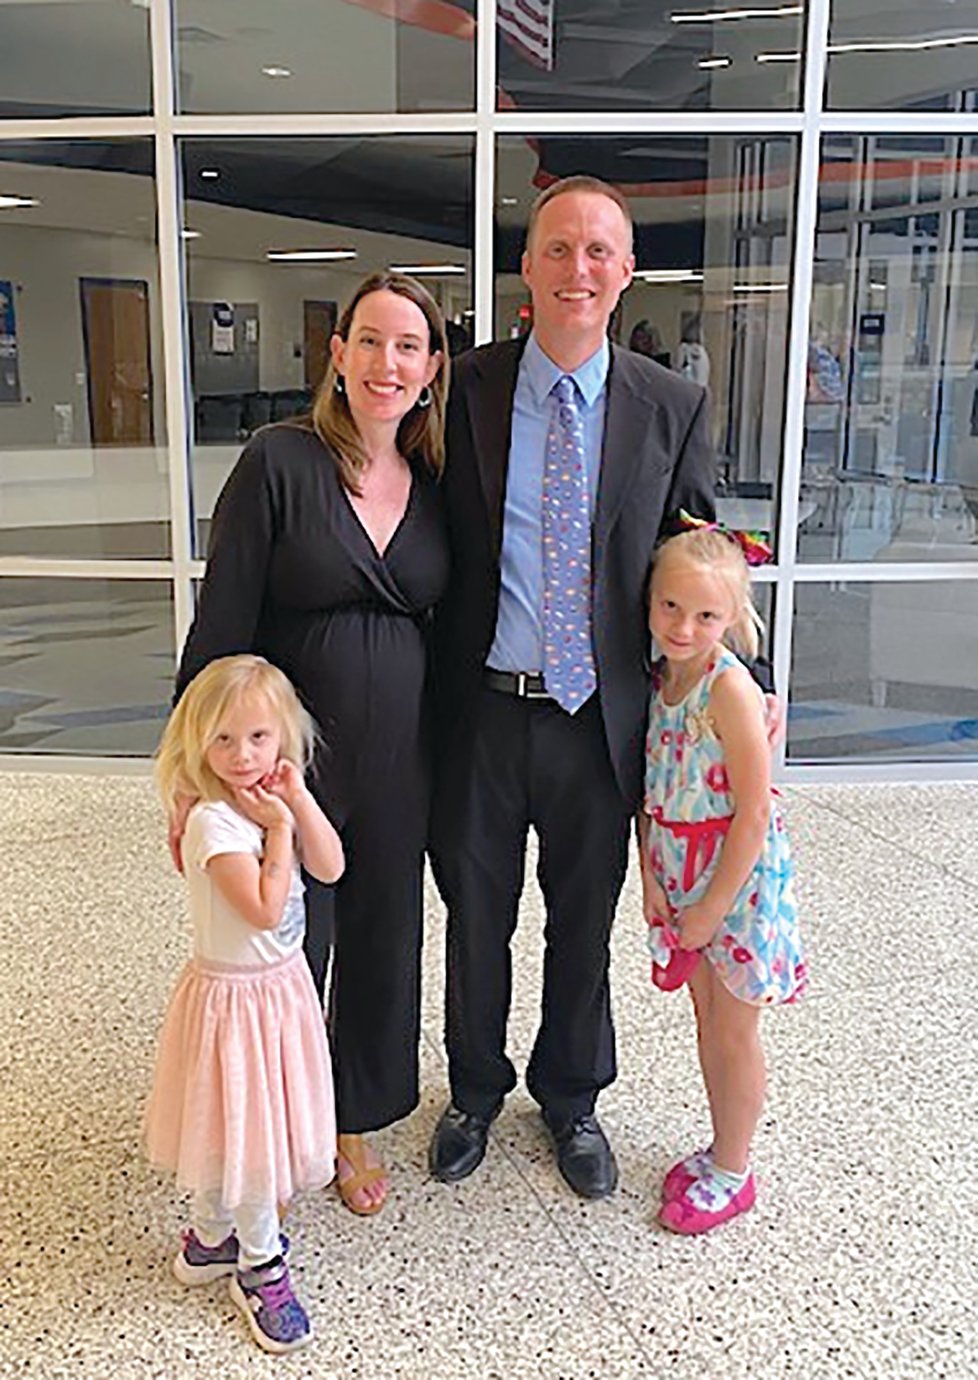 Jonathan Guthrie and his family celebrate approval Monday to become North Montgomery High School’s newest principal following the departure of Michael Cox. Guthrie, along with wife Becky and his two children, are set to welcome a third later this year.